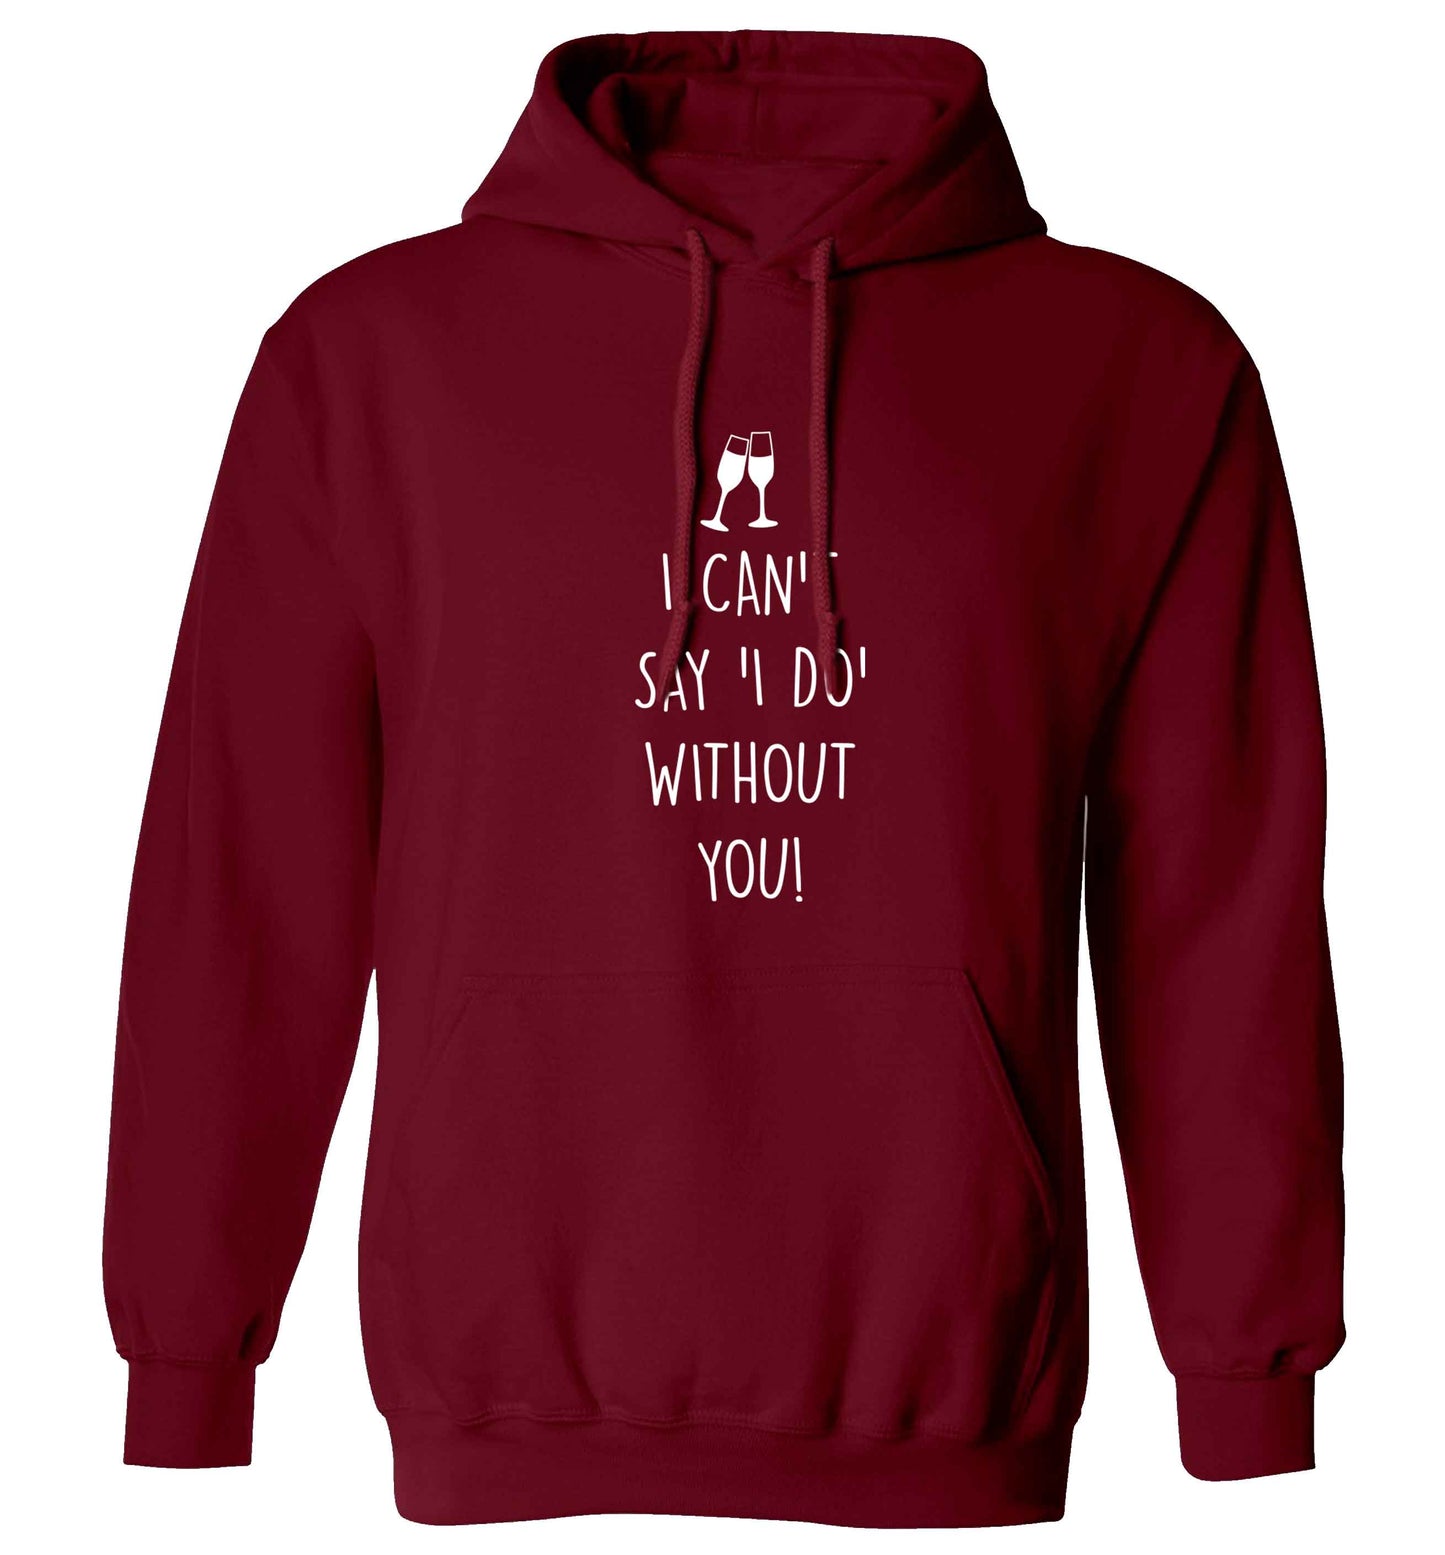 I can't say 'I do' without you! adults unisex maroon hoodie 2XL